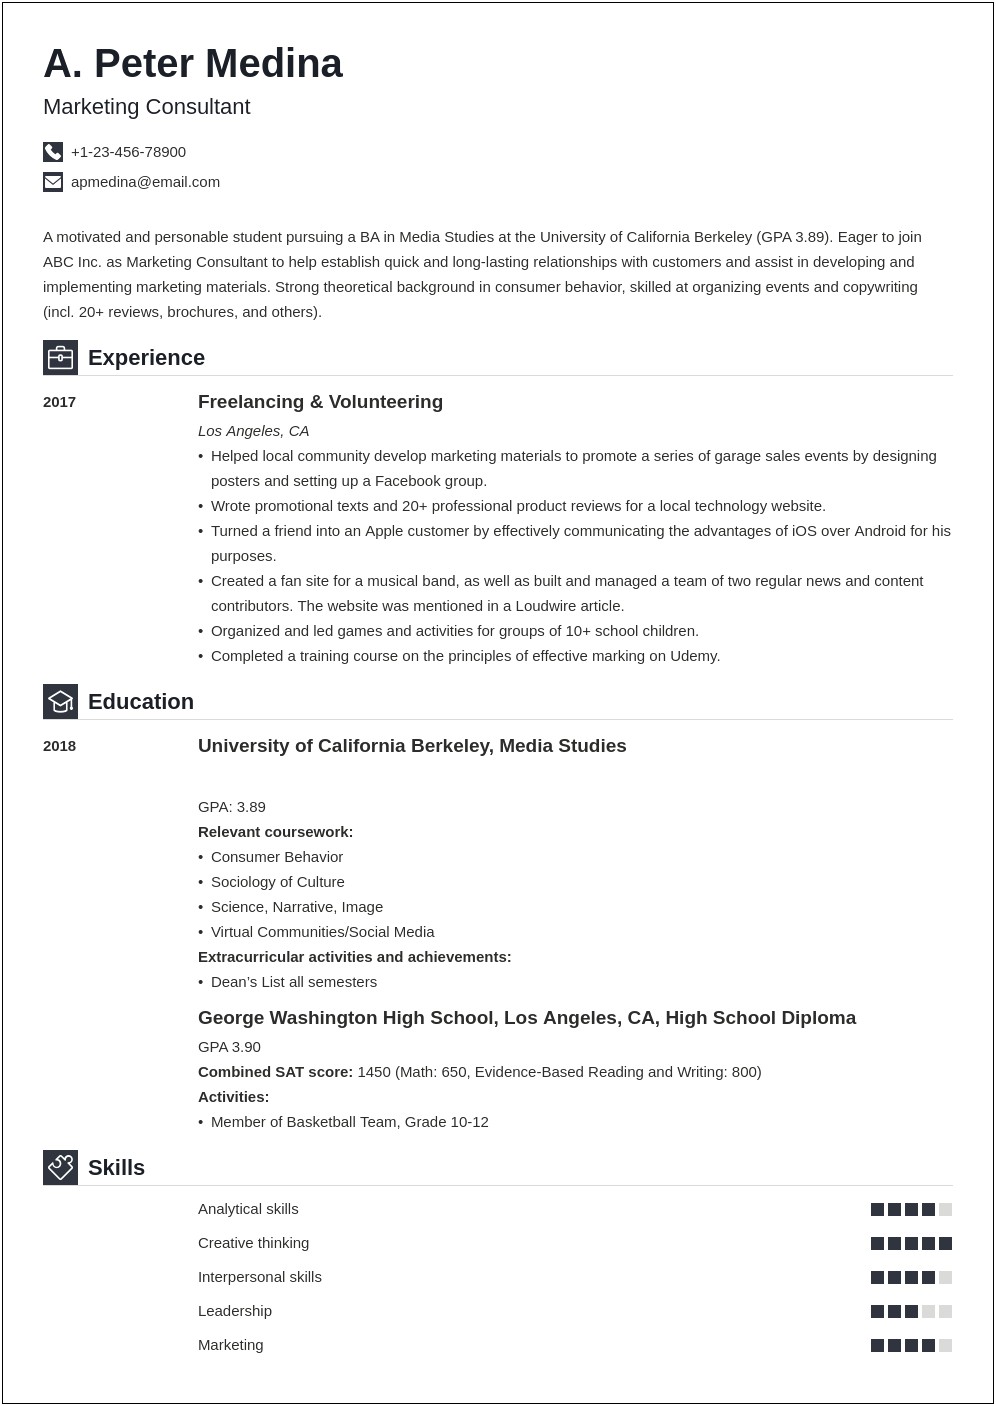 Resume Professional Summary About Eager To Learn